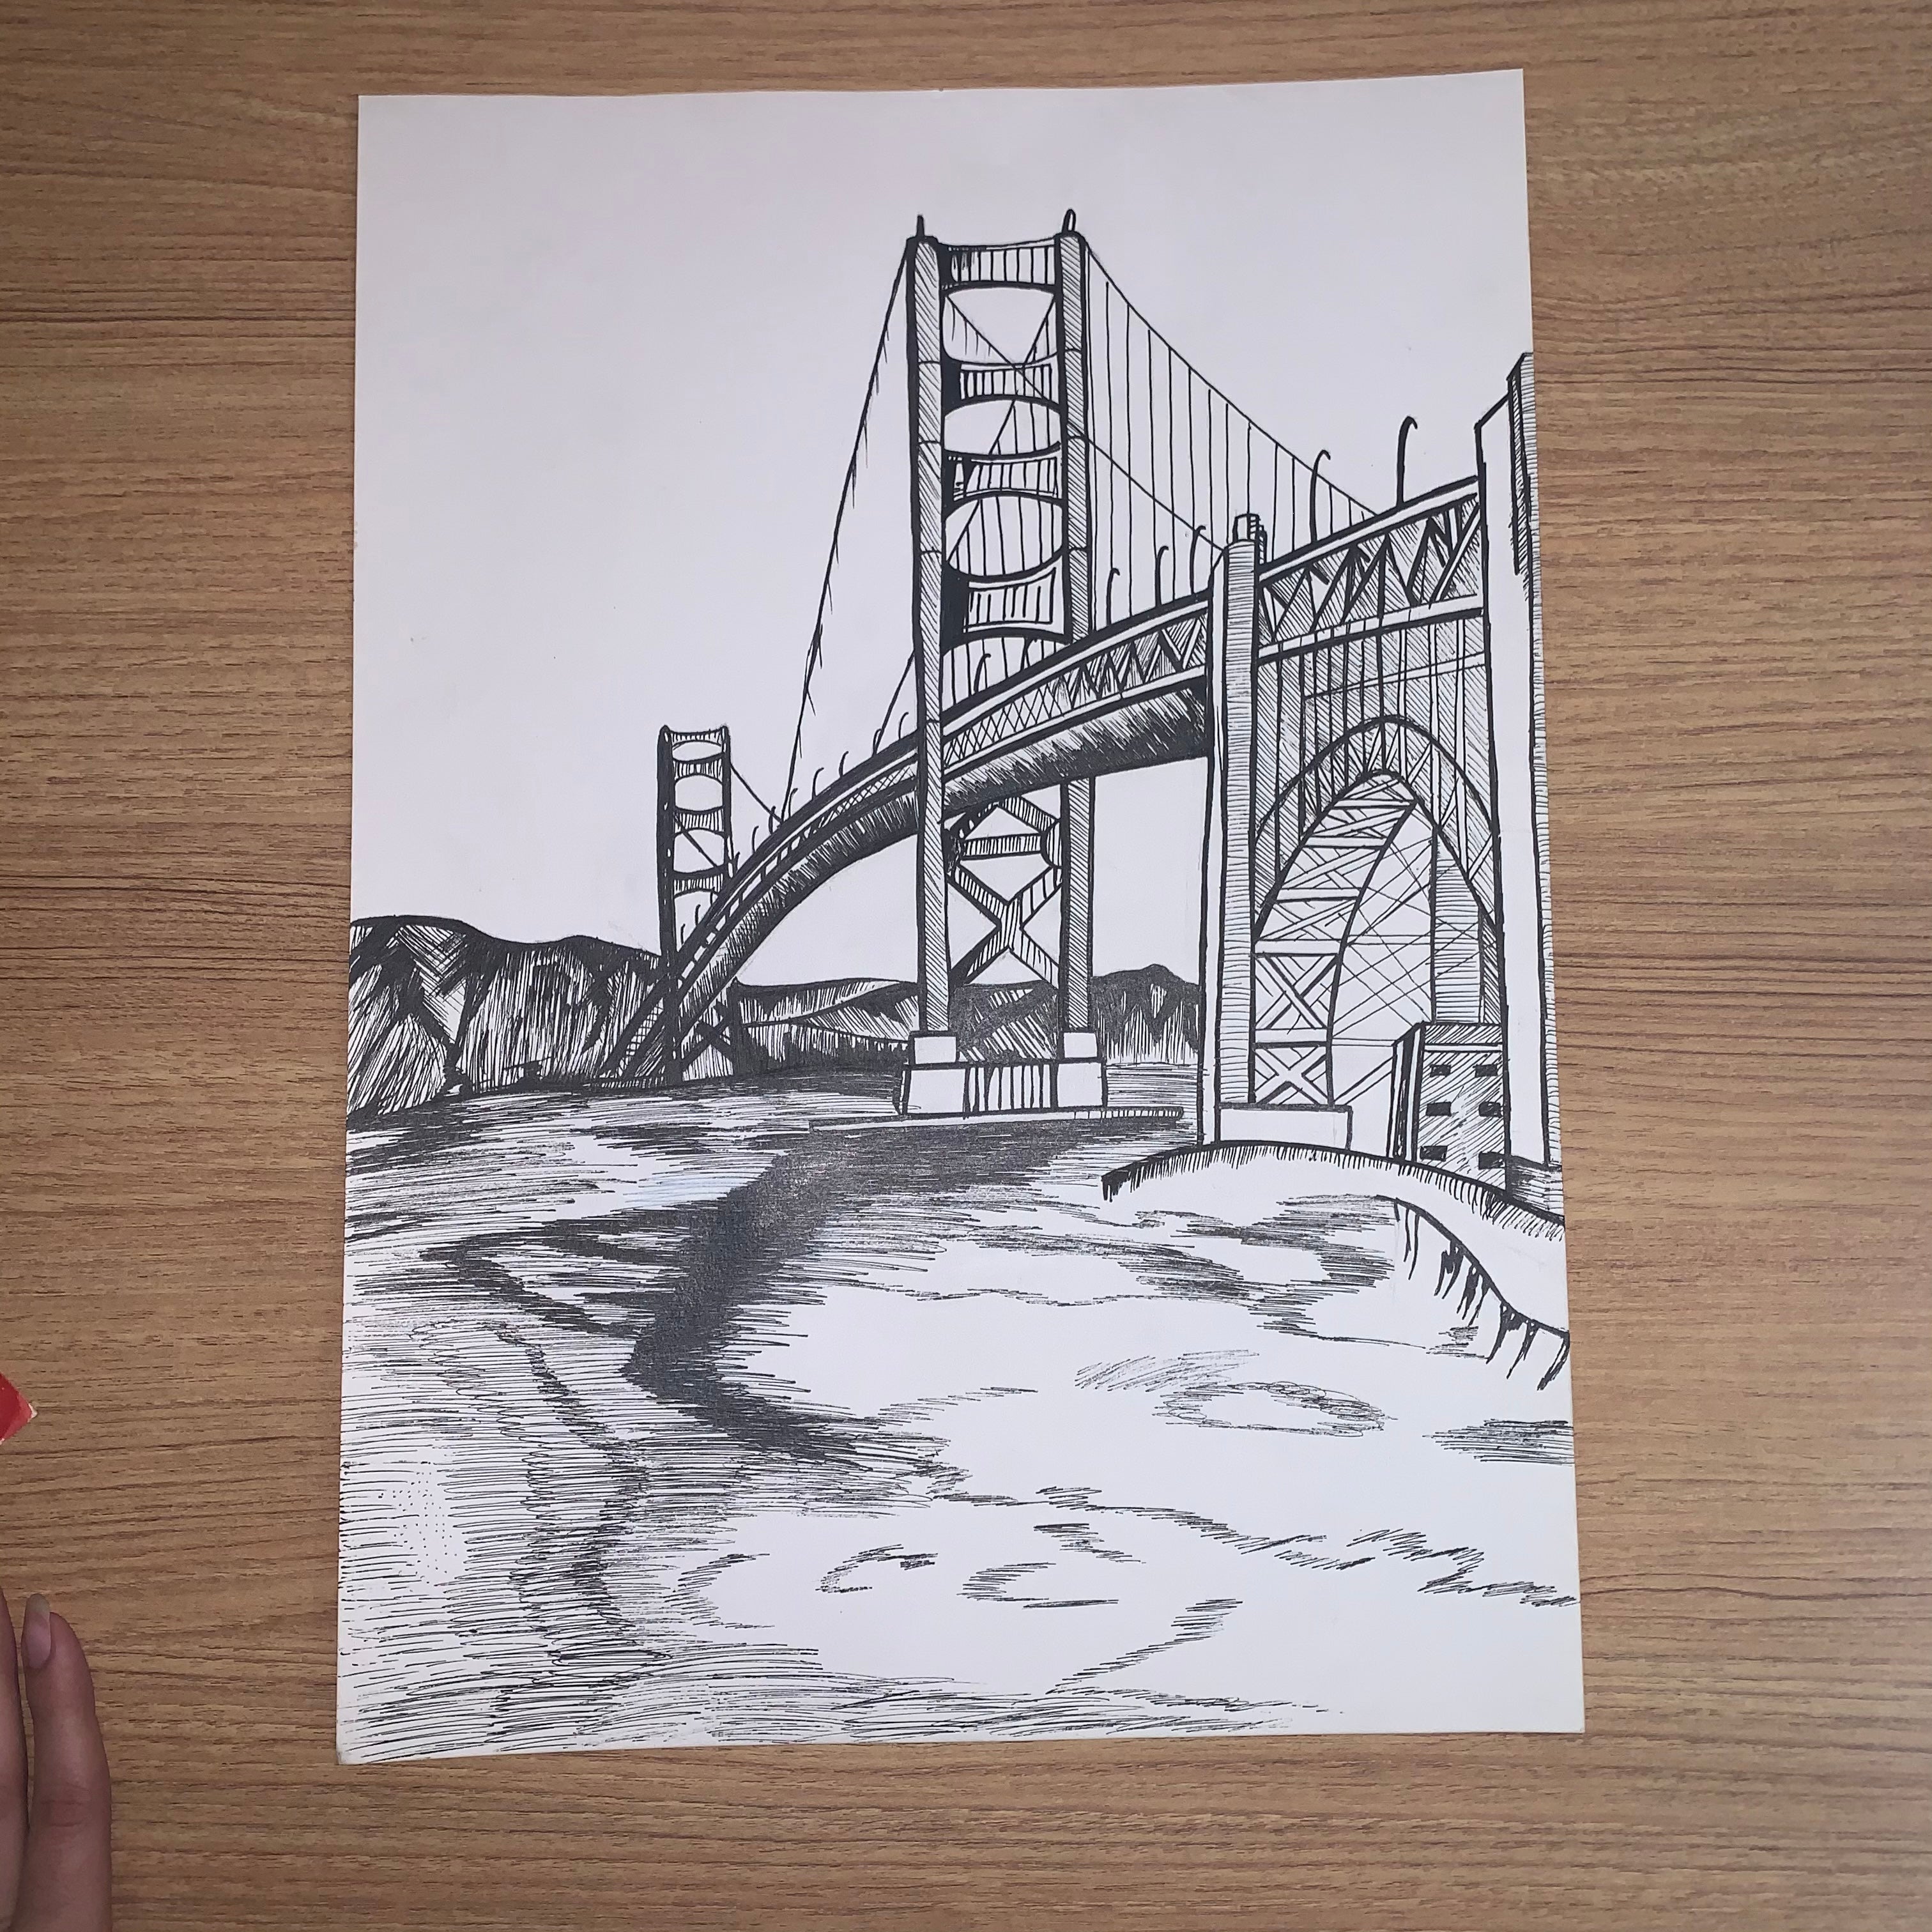 Learn to Draw Pen and Ink Landscapes - Pen and Ink Drawings by Rahul Jain